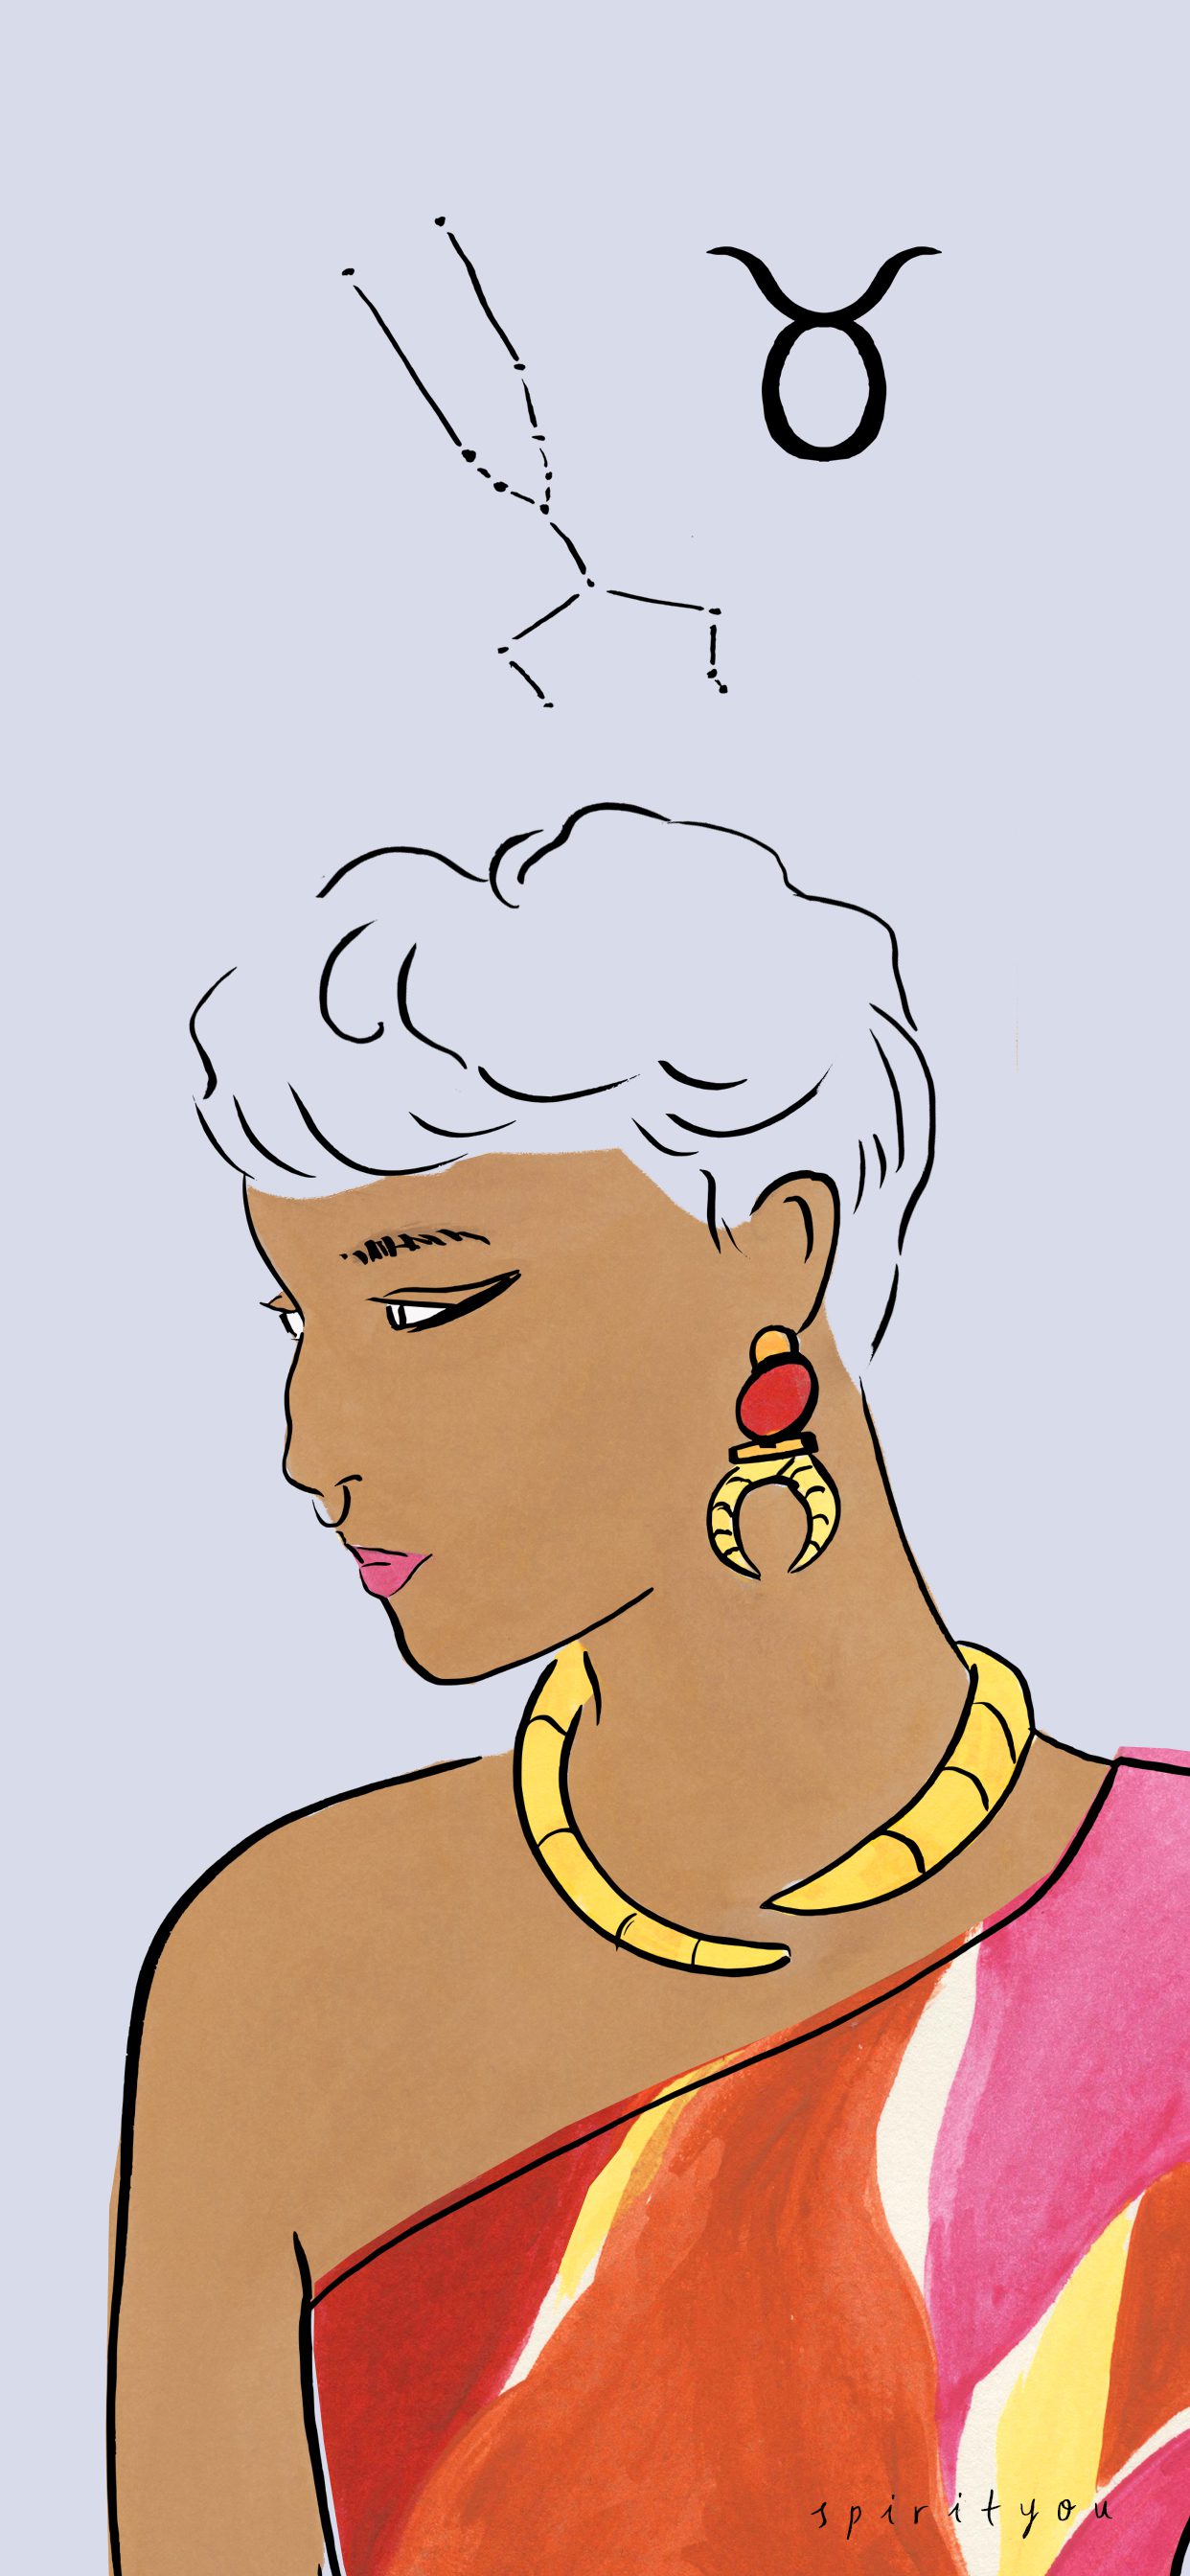 An illustration of a woman with grey hair and a gold necklace. - Taurus